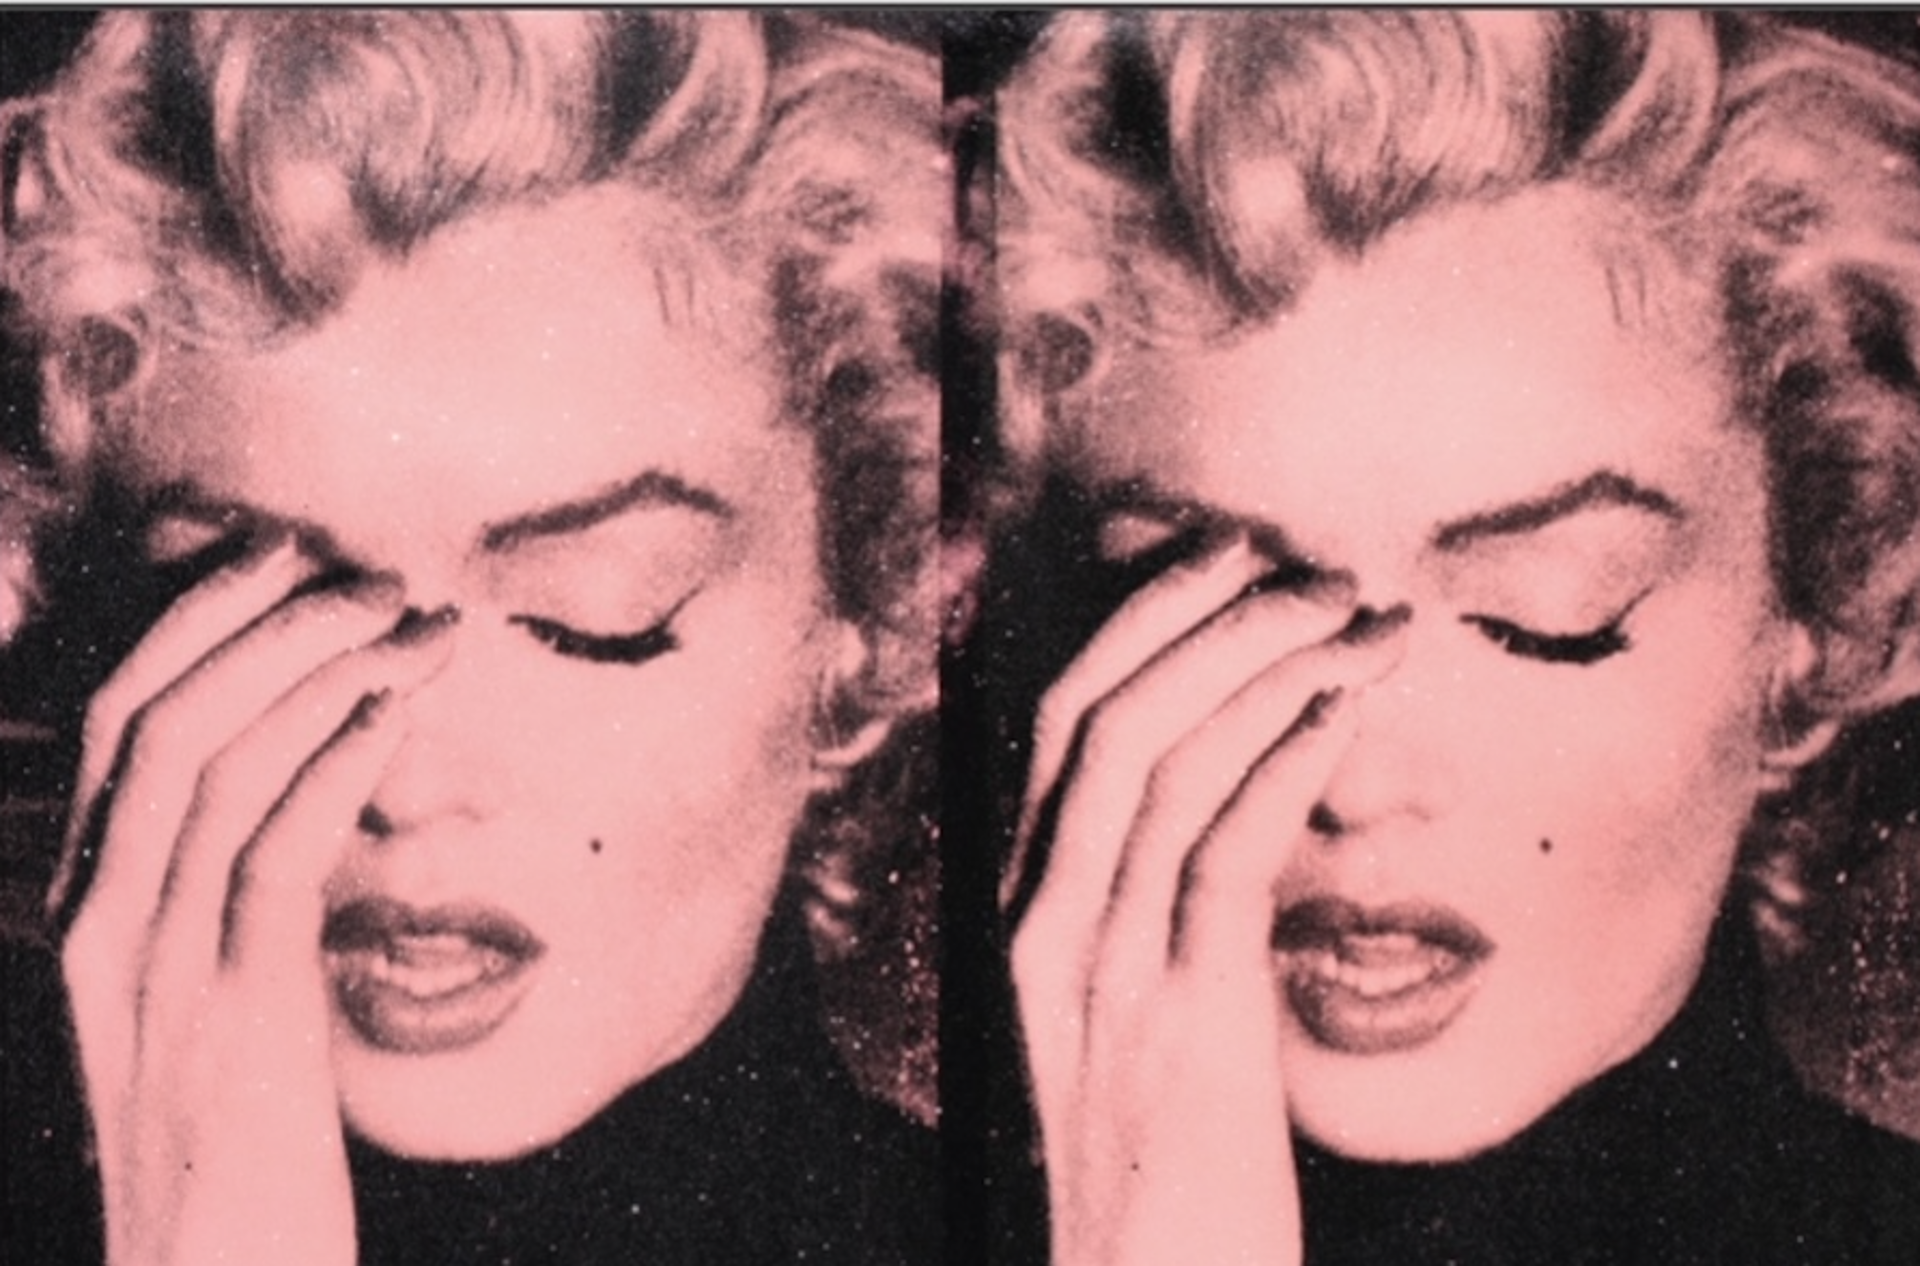 Crying Marilyn Diptych - Star Pink by Russell Young